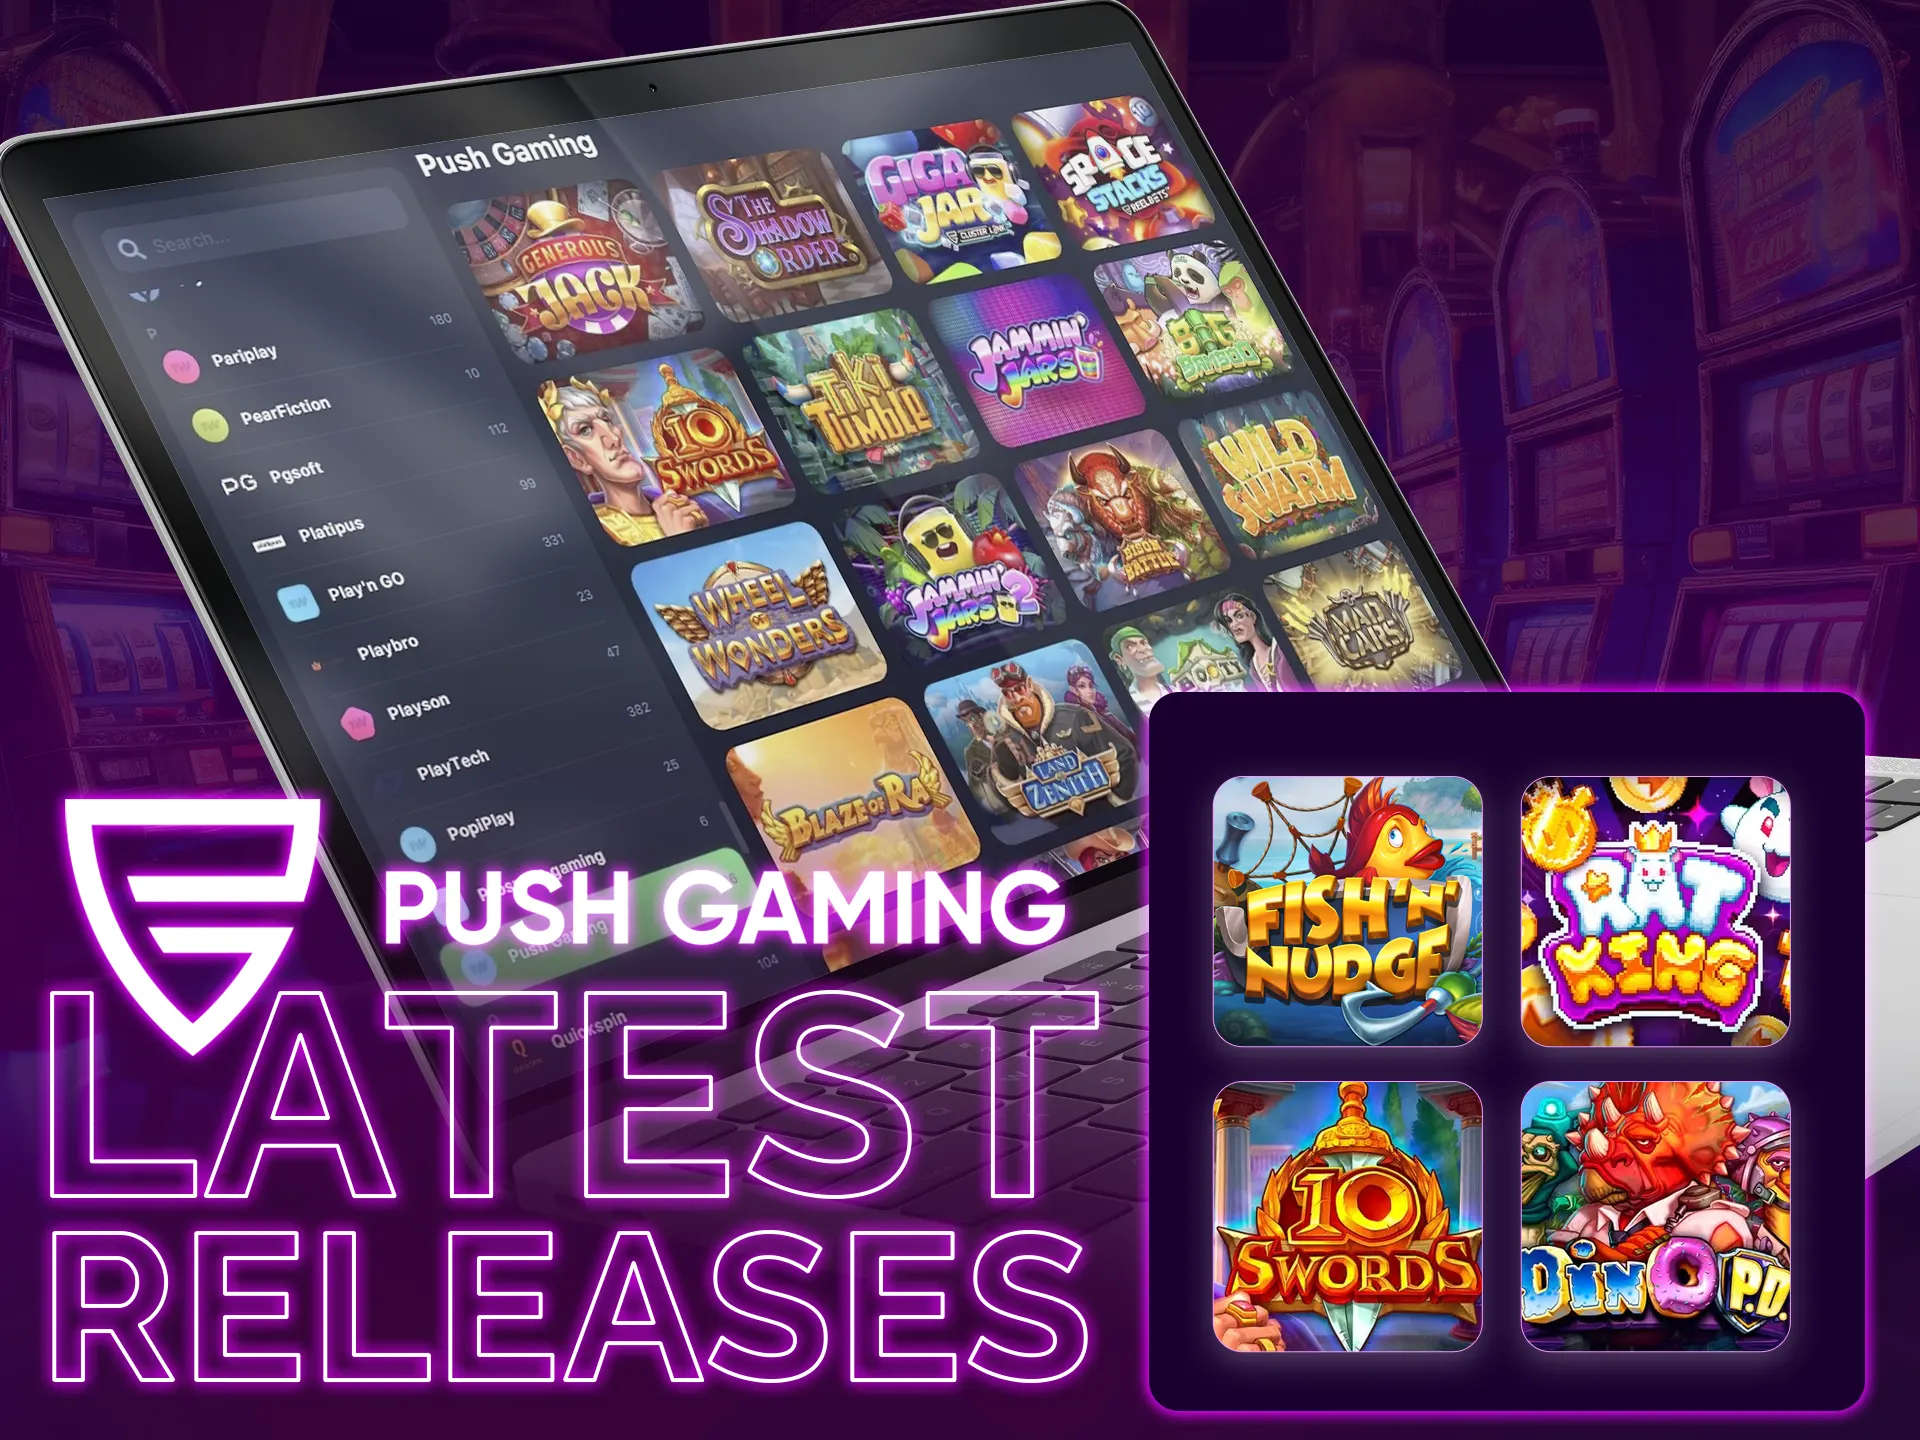 Explore the newest, latest released games from Push Gaming provider.